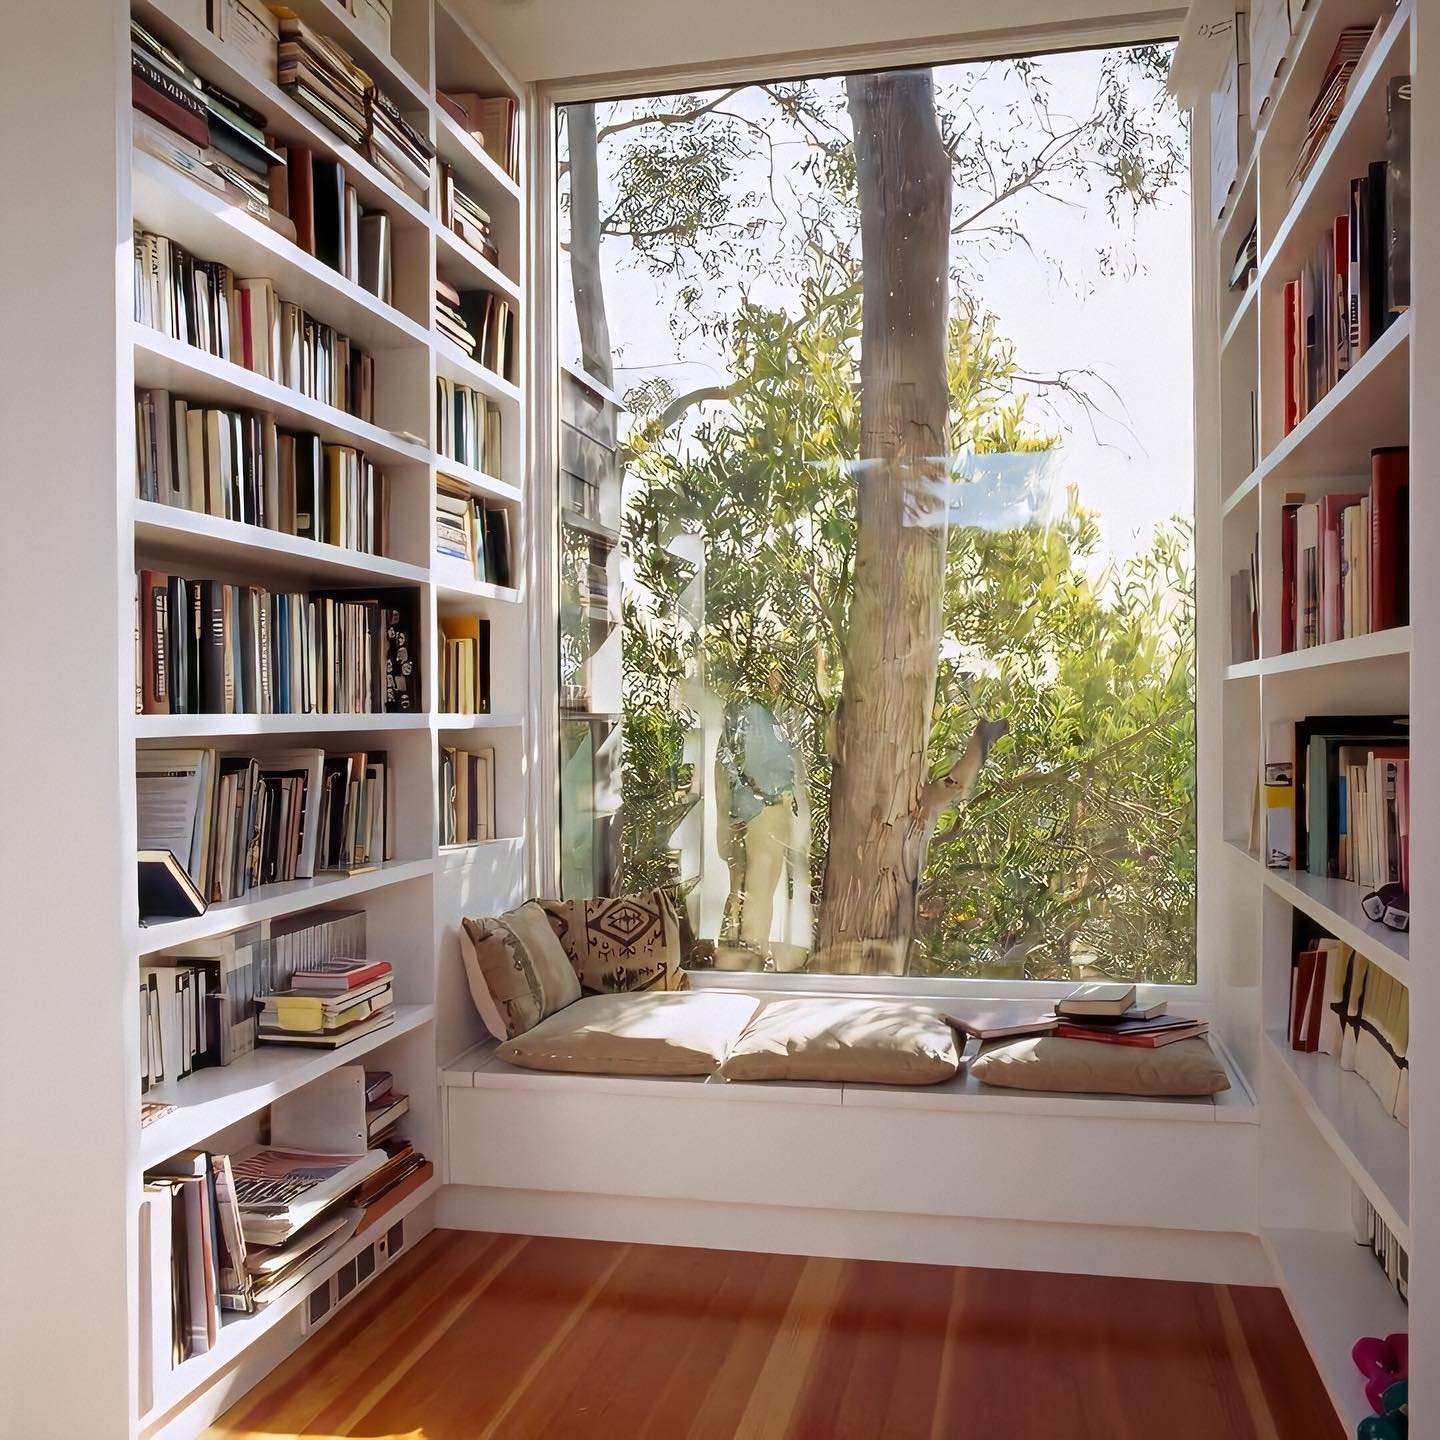 10 Inspiring Home Office Library Designs for Every Decor Style